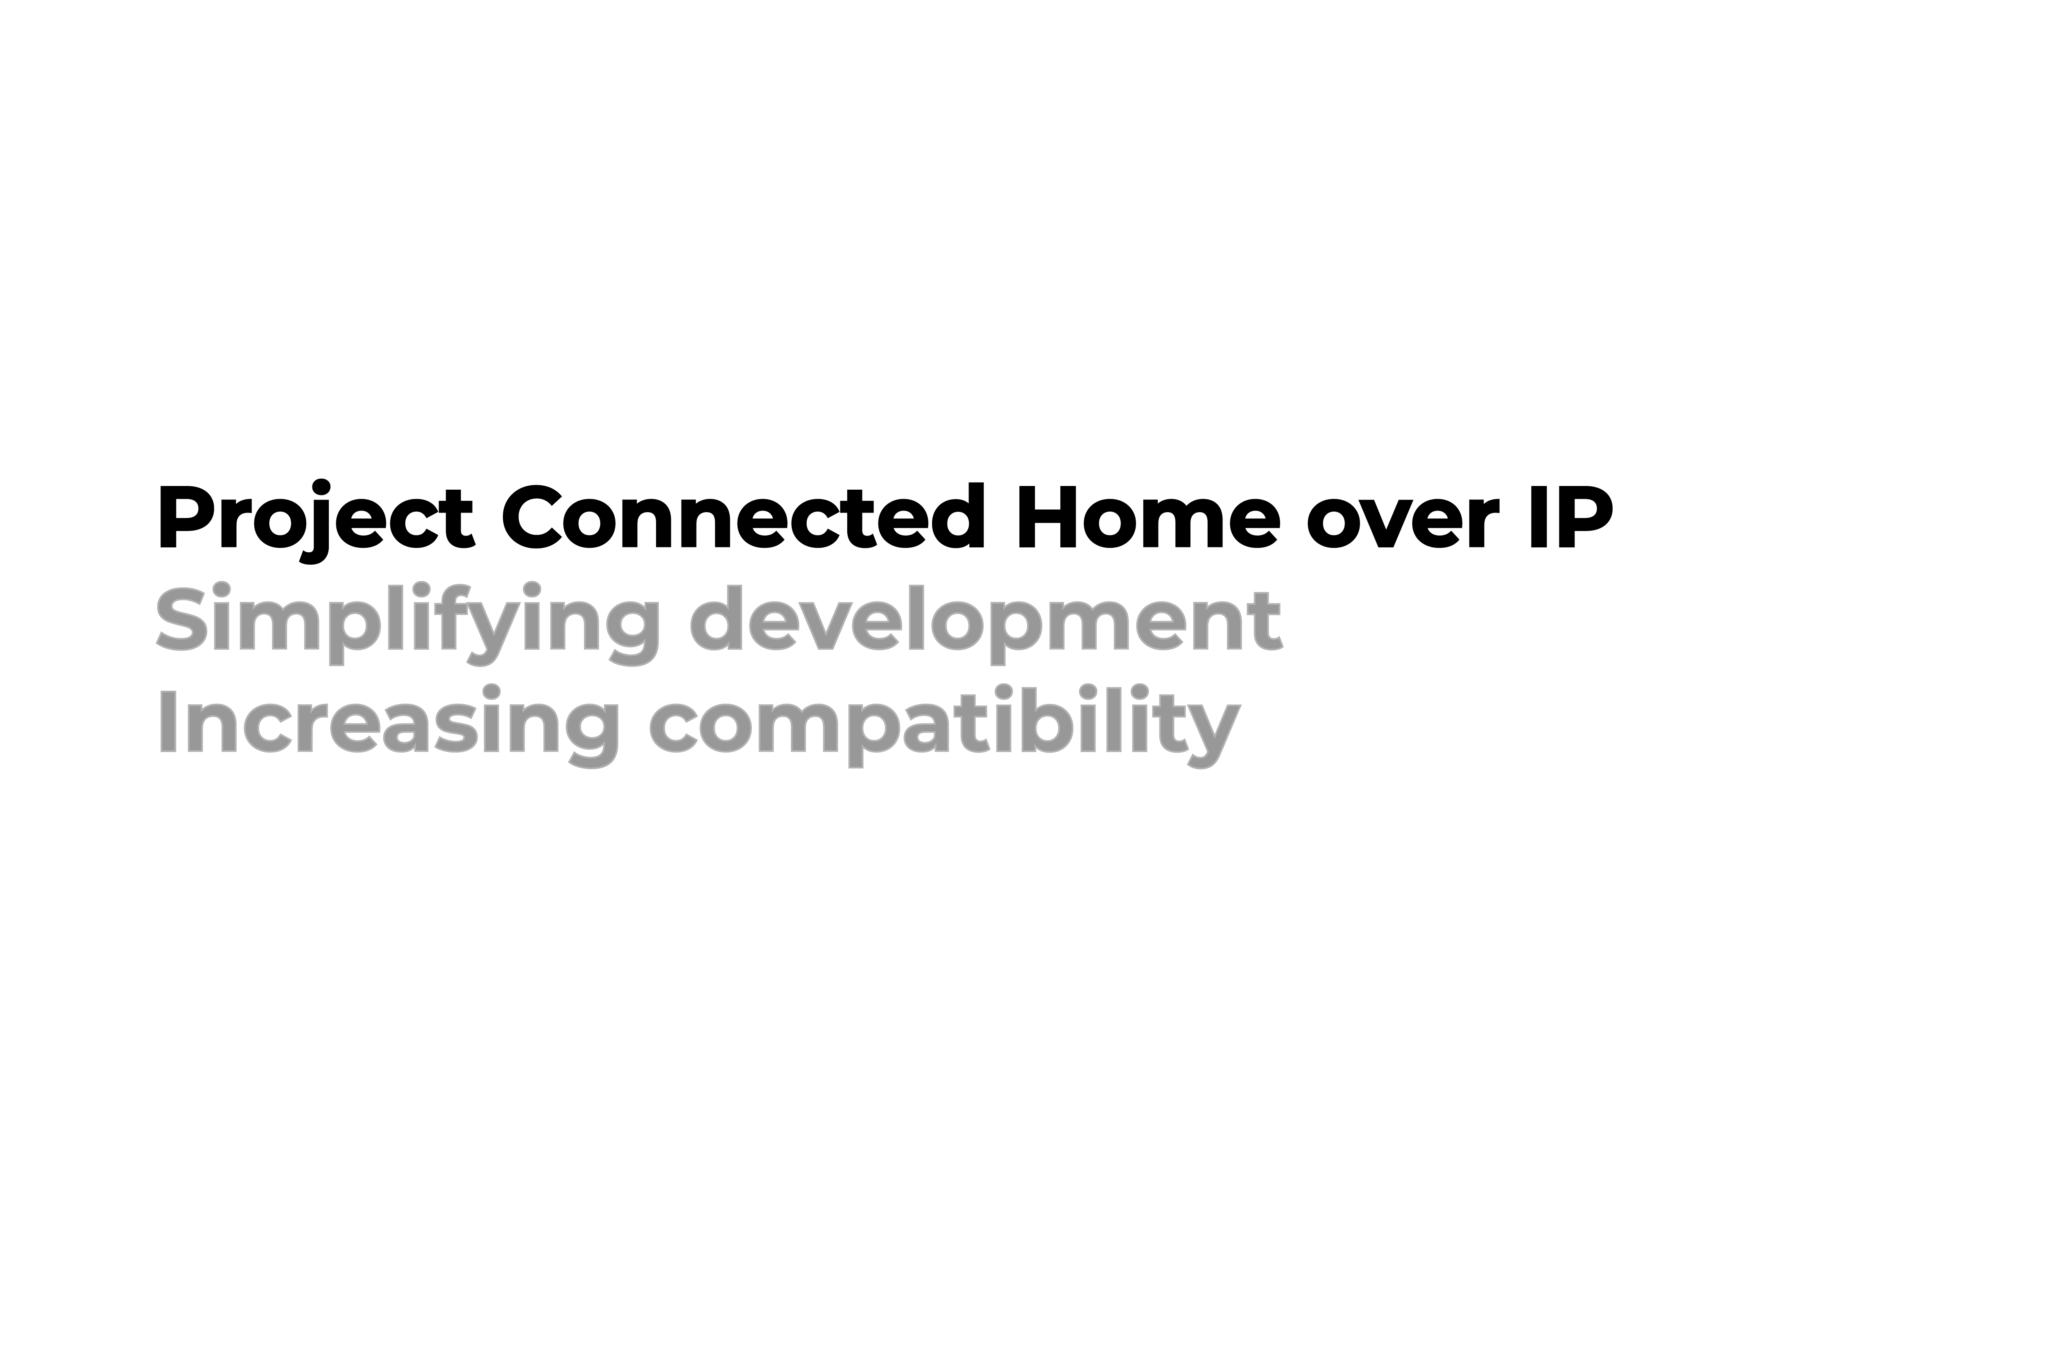 https://csa-iot.org/wp-content/uploads/2022/01/Project-Connect-Home-over-IP-2-2048x1365.png